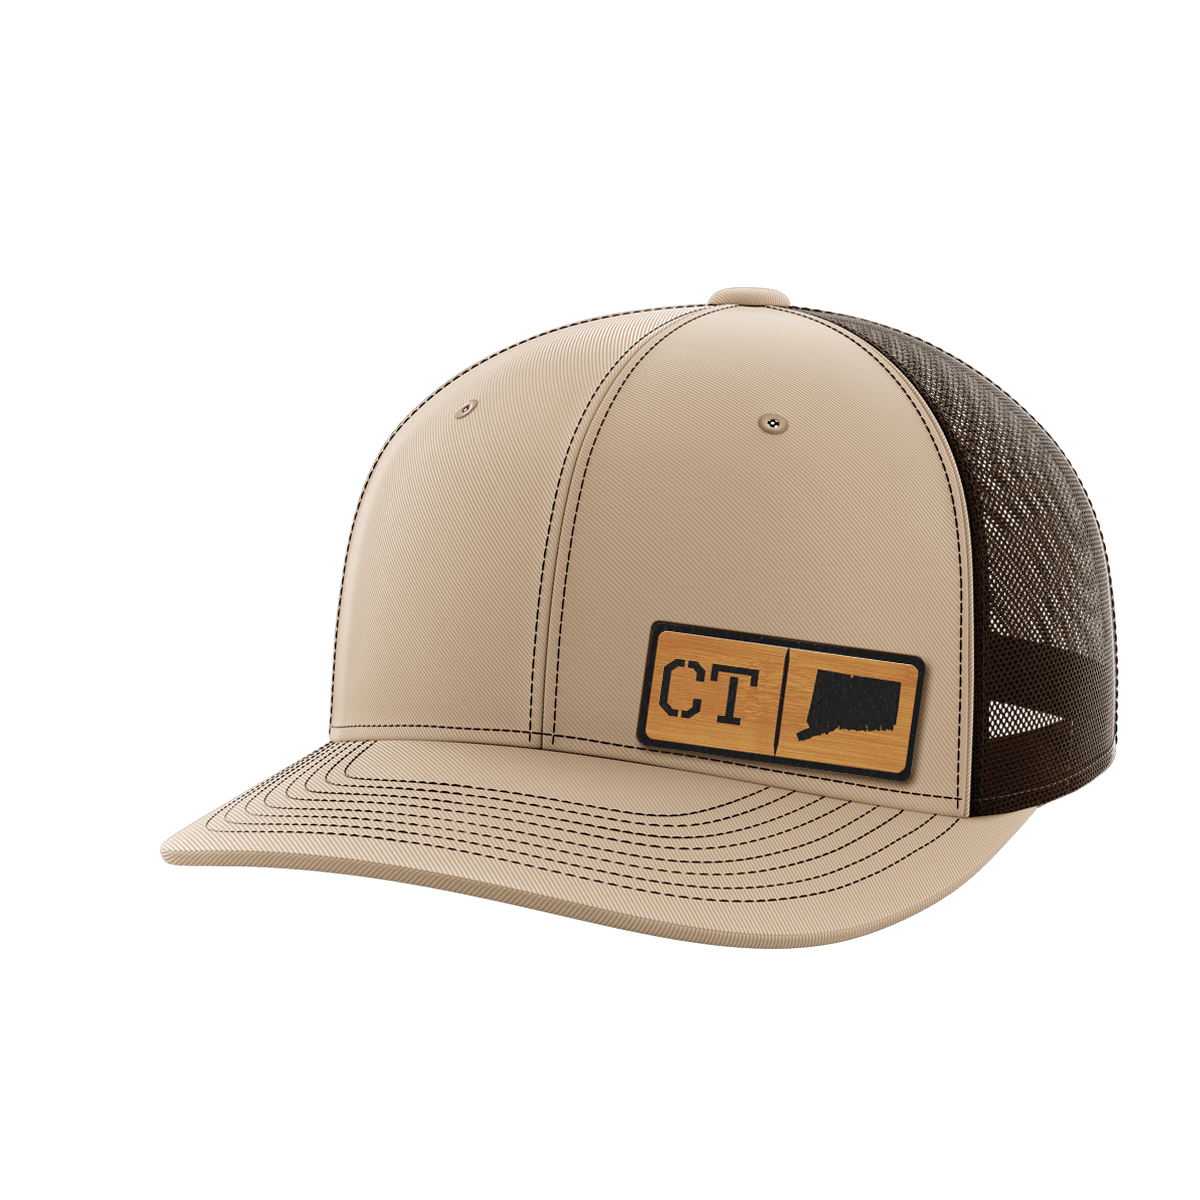 Connecticut Homegrown Hats - Greater Half